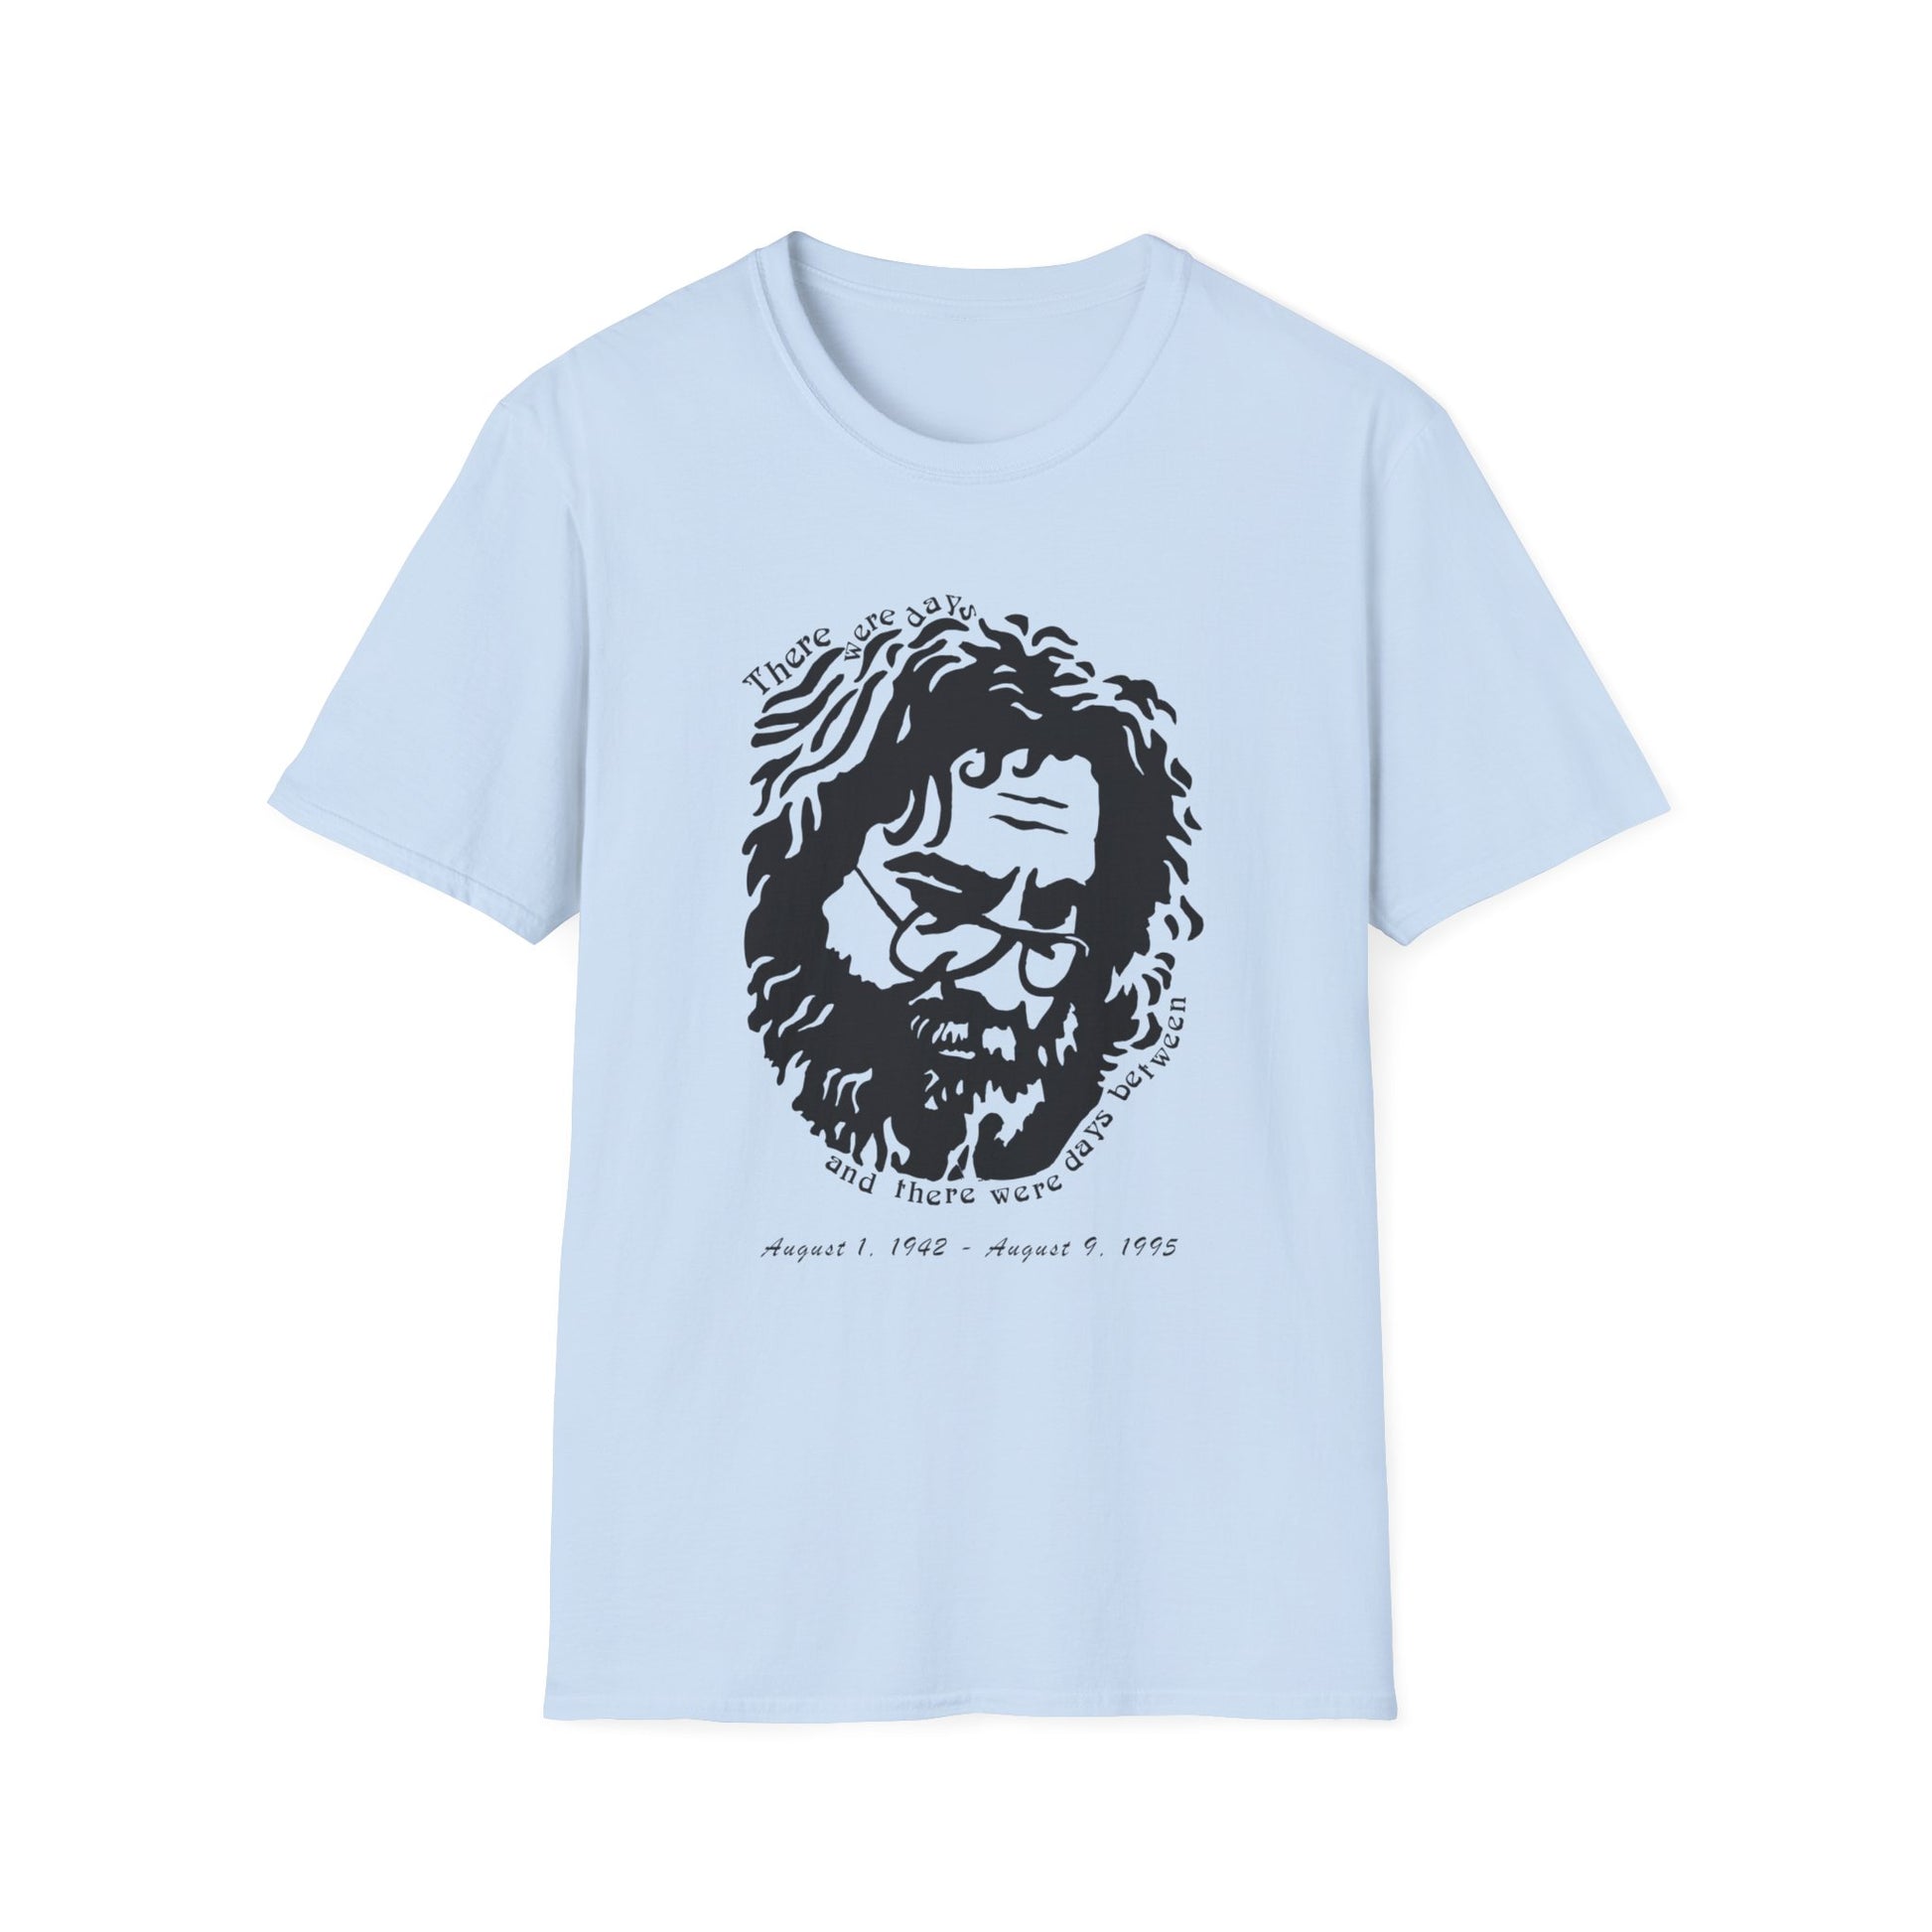 Days Between - Jerry Garcia T-Shirt Dead-Inspired Full Grateful – Coverage - LLC Tees